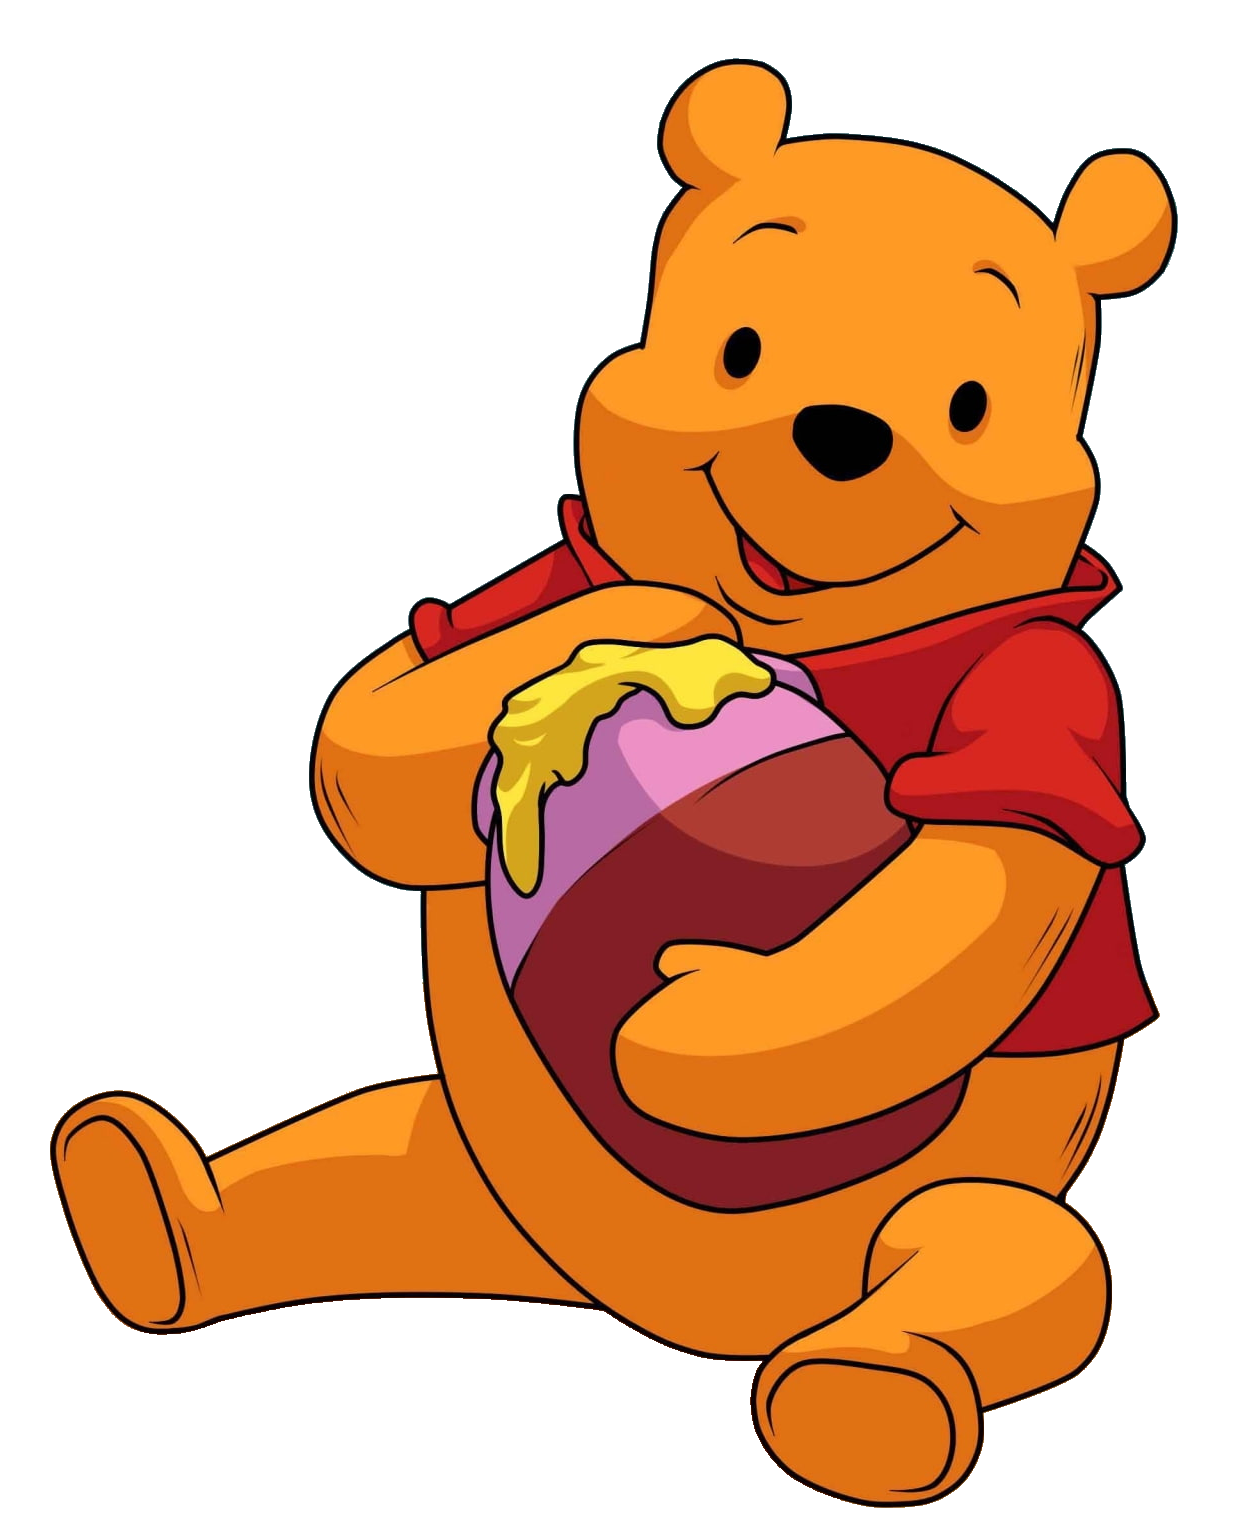 Winnie The Pooh Png Images Free Download Pngfre 